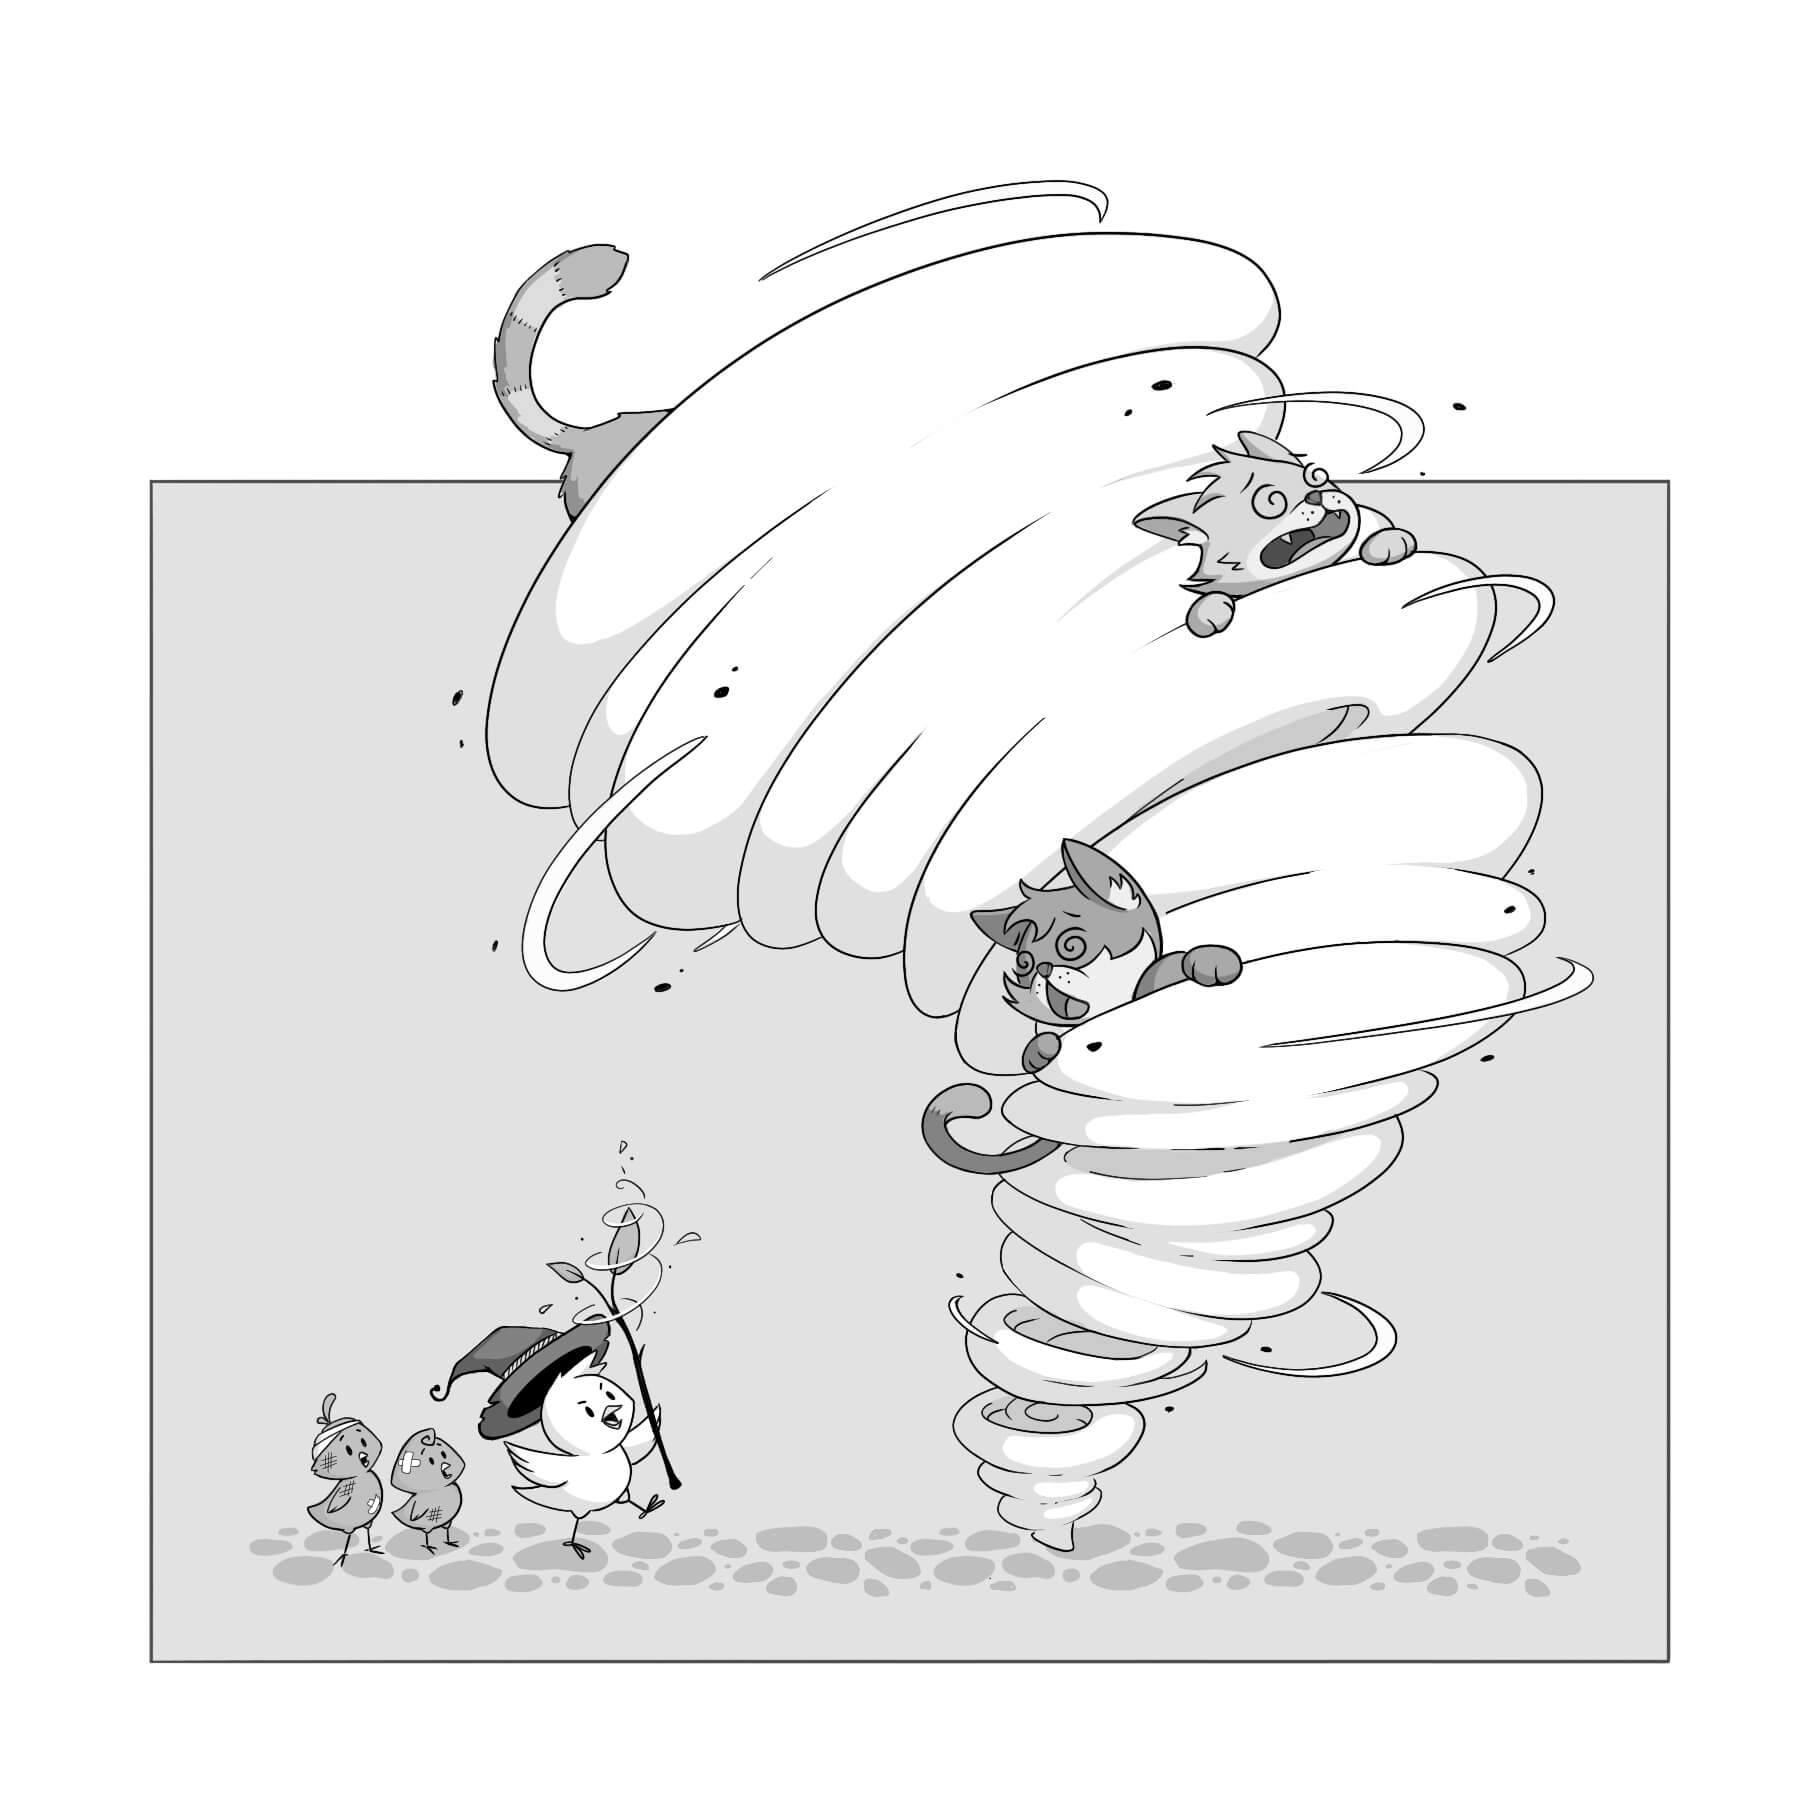 Illustration: A bird with a magic staff has captured 3 bully cats in a small tornado.